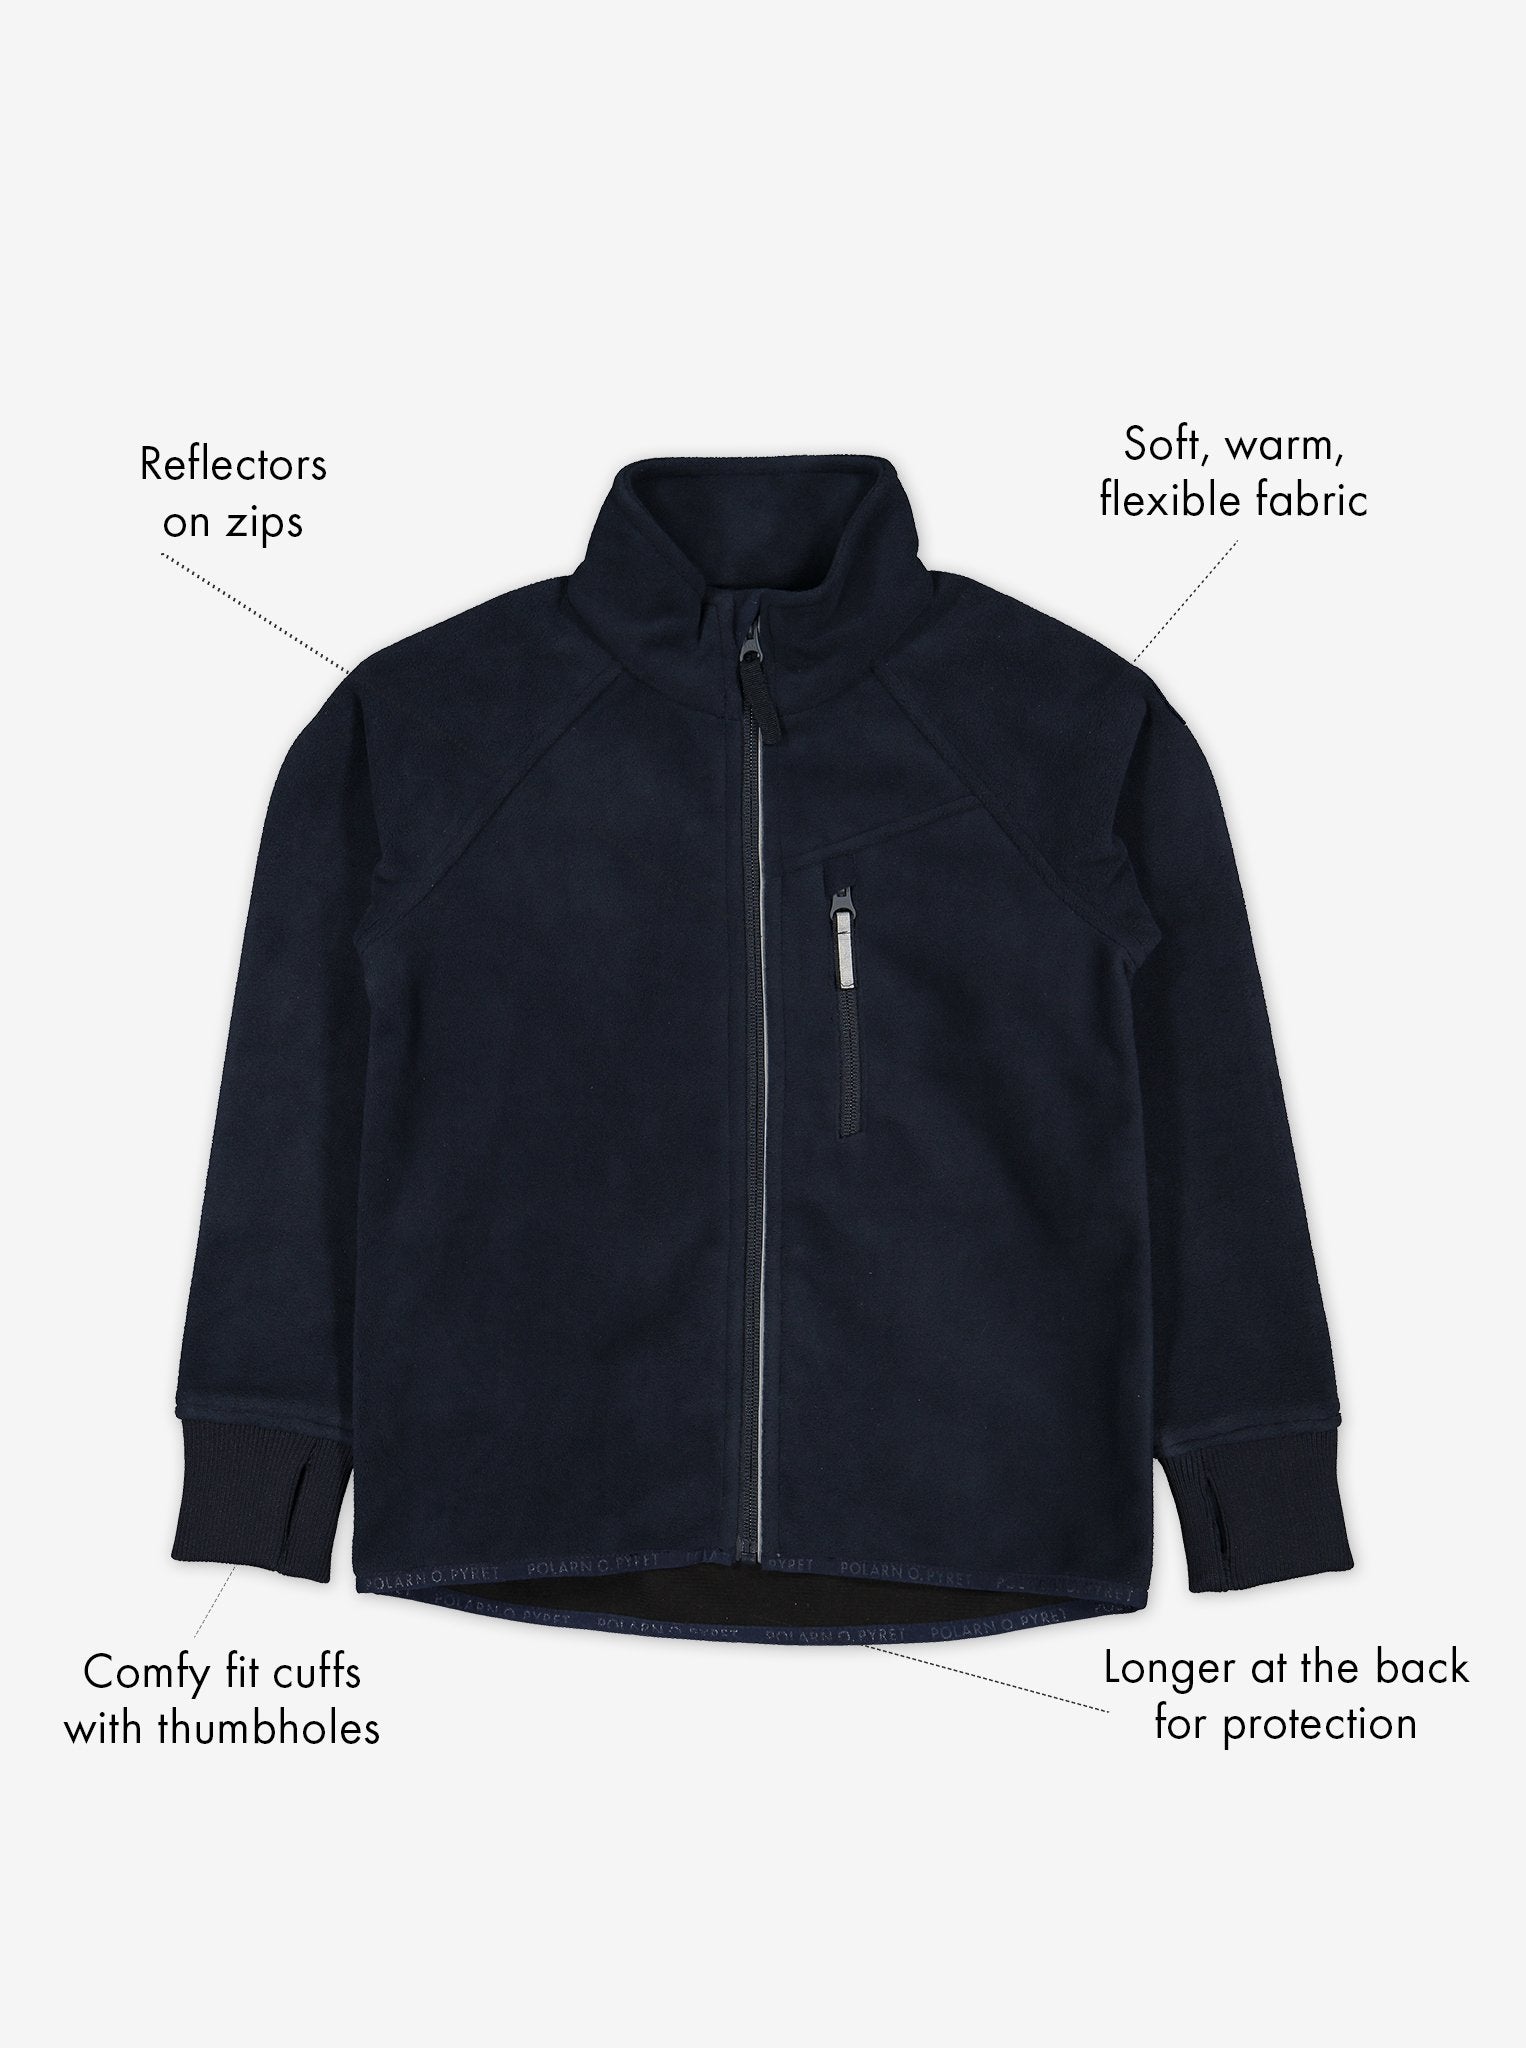 Kids navy waterproof fleece jacket, warm and breathable, high quality with functions